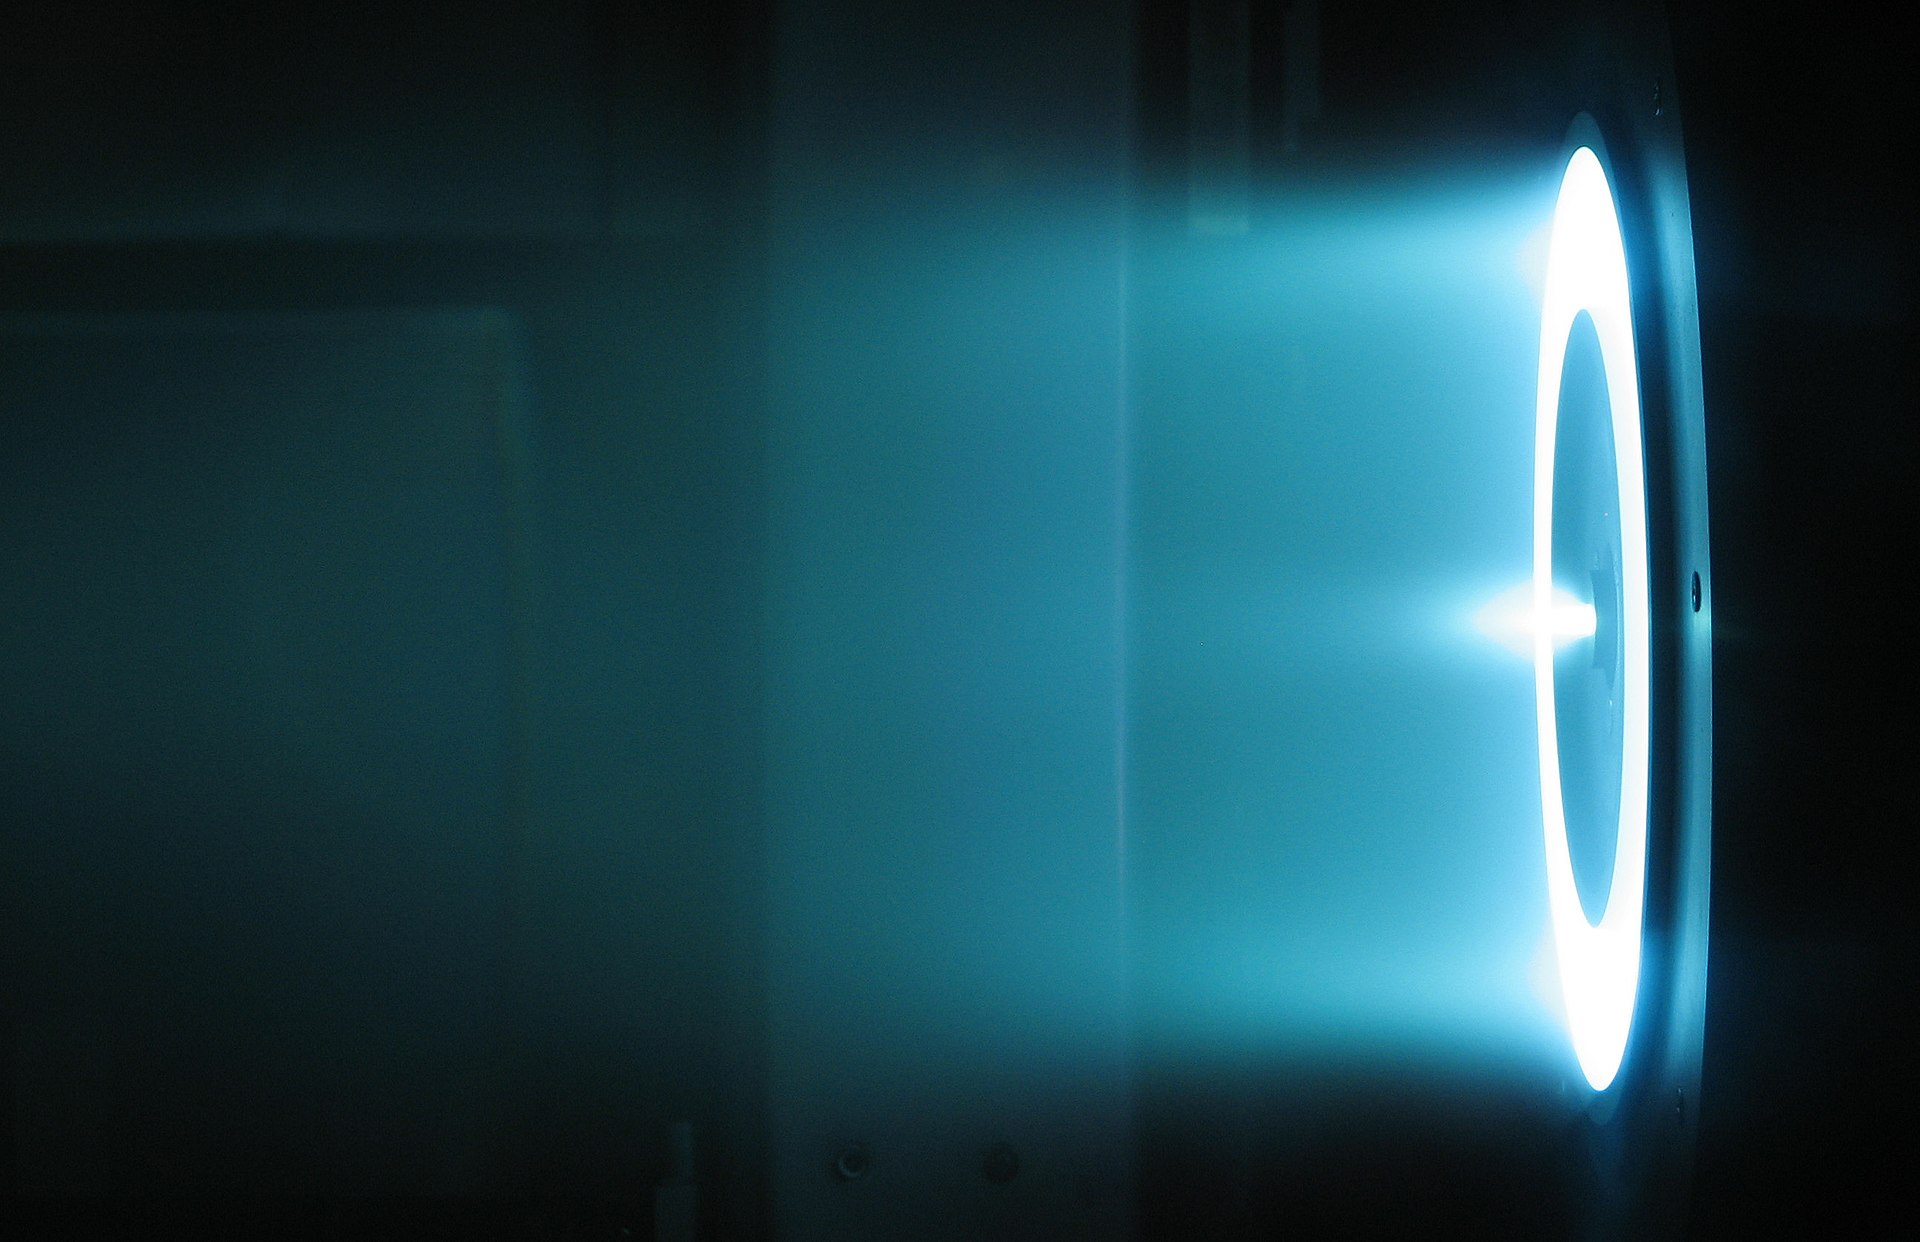 A solar electric propulsion Hall Effect thruster being tested under vacuum conditions at NASA.